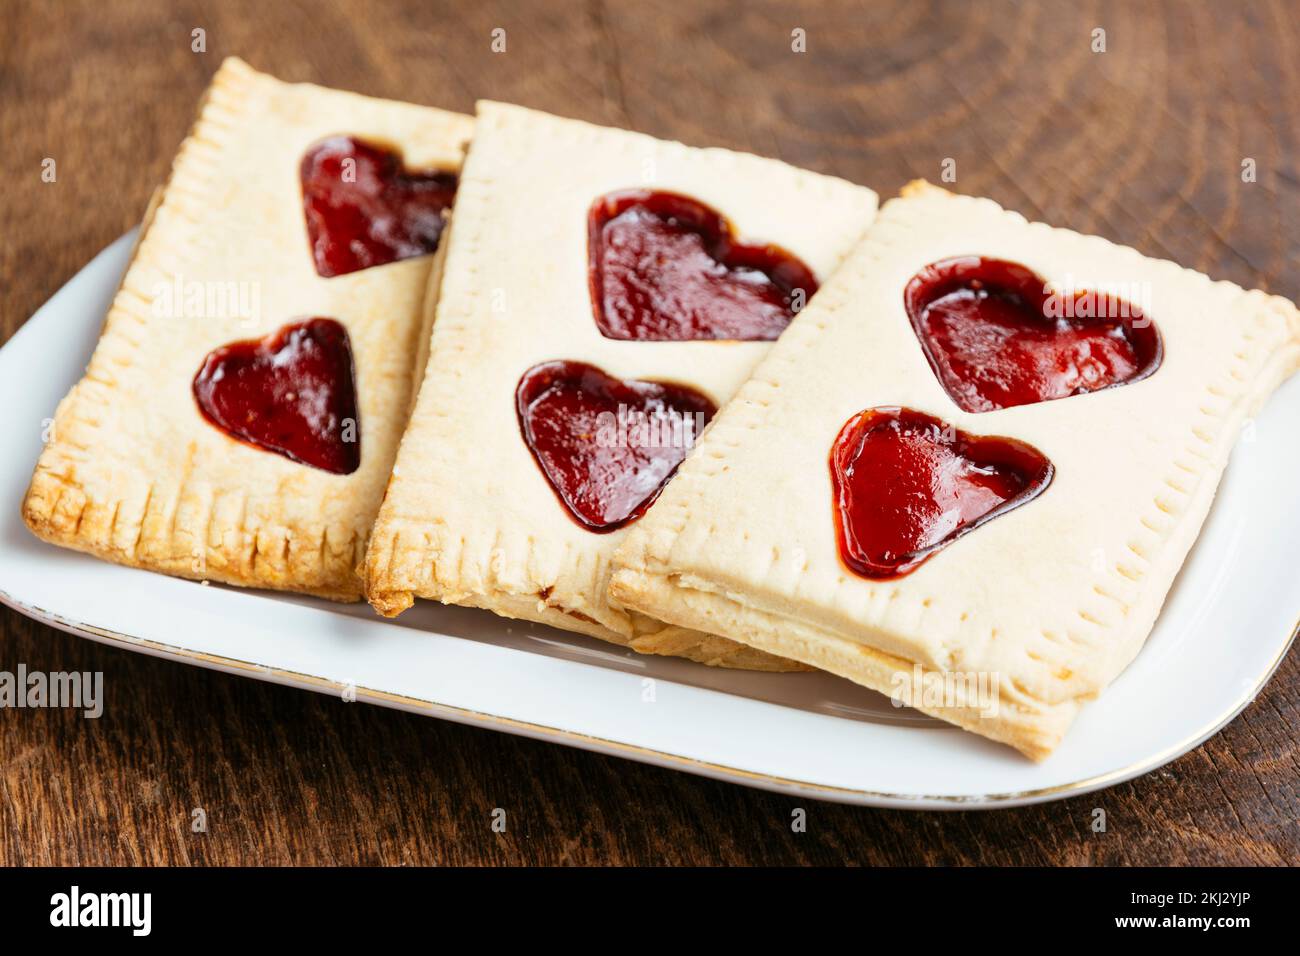 Toaster pastries with a red currant jam filling. Stock Photo